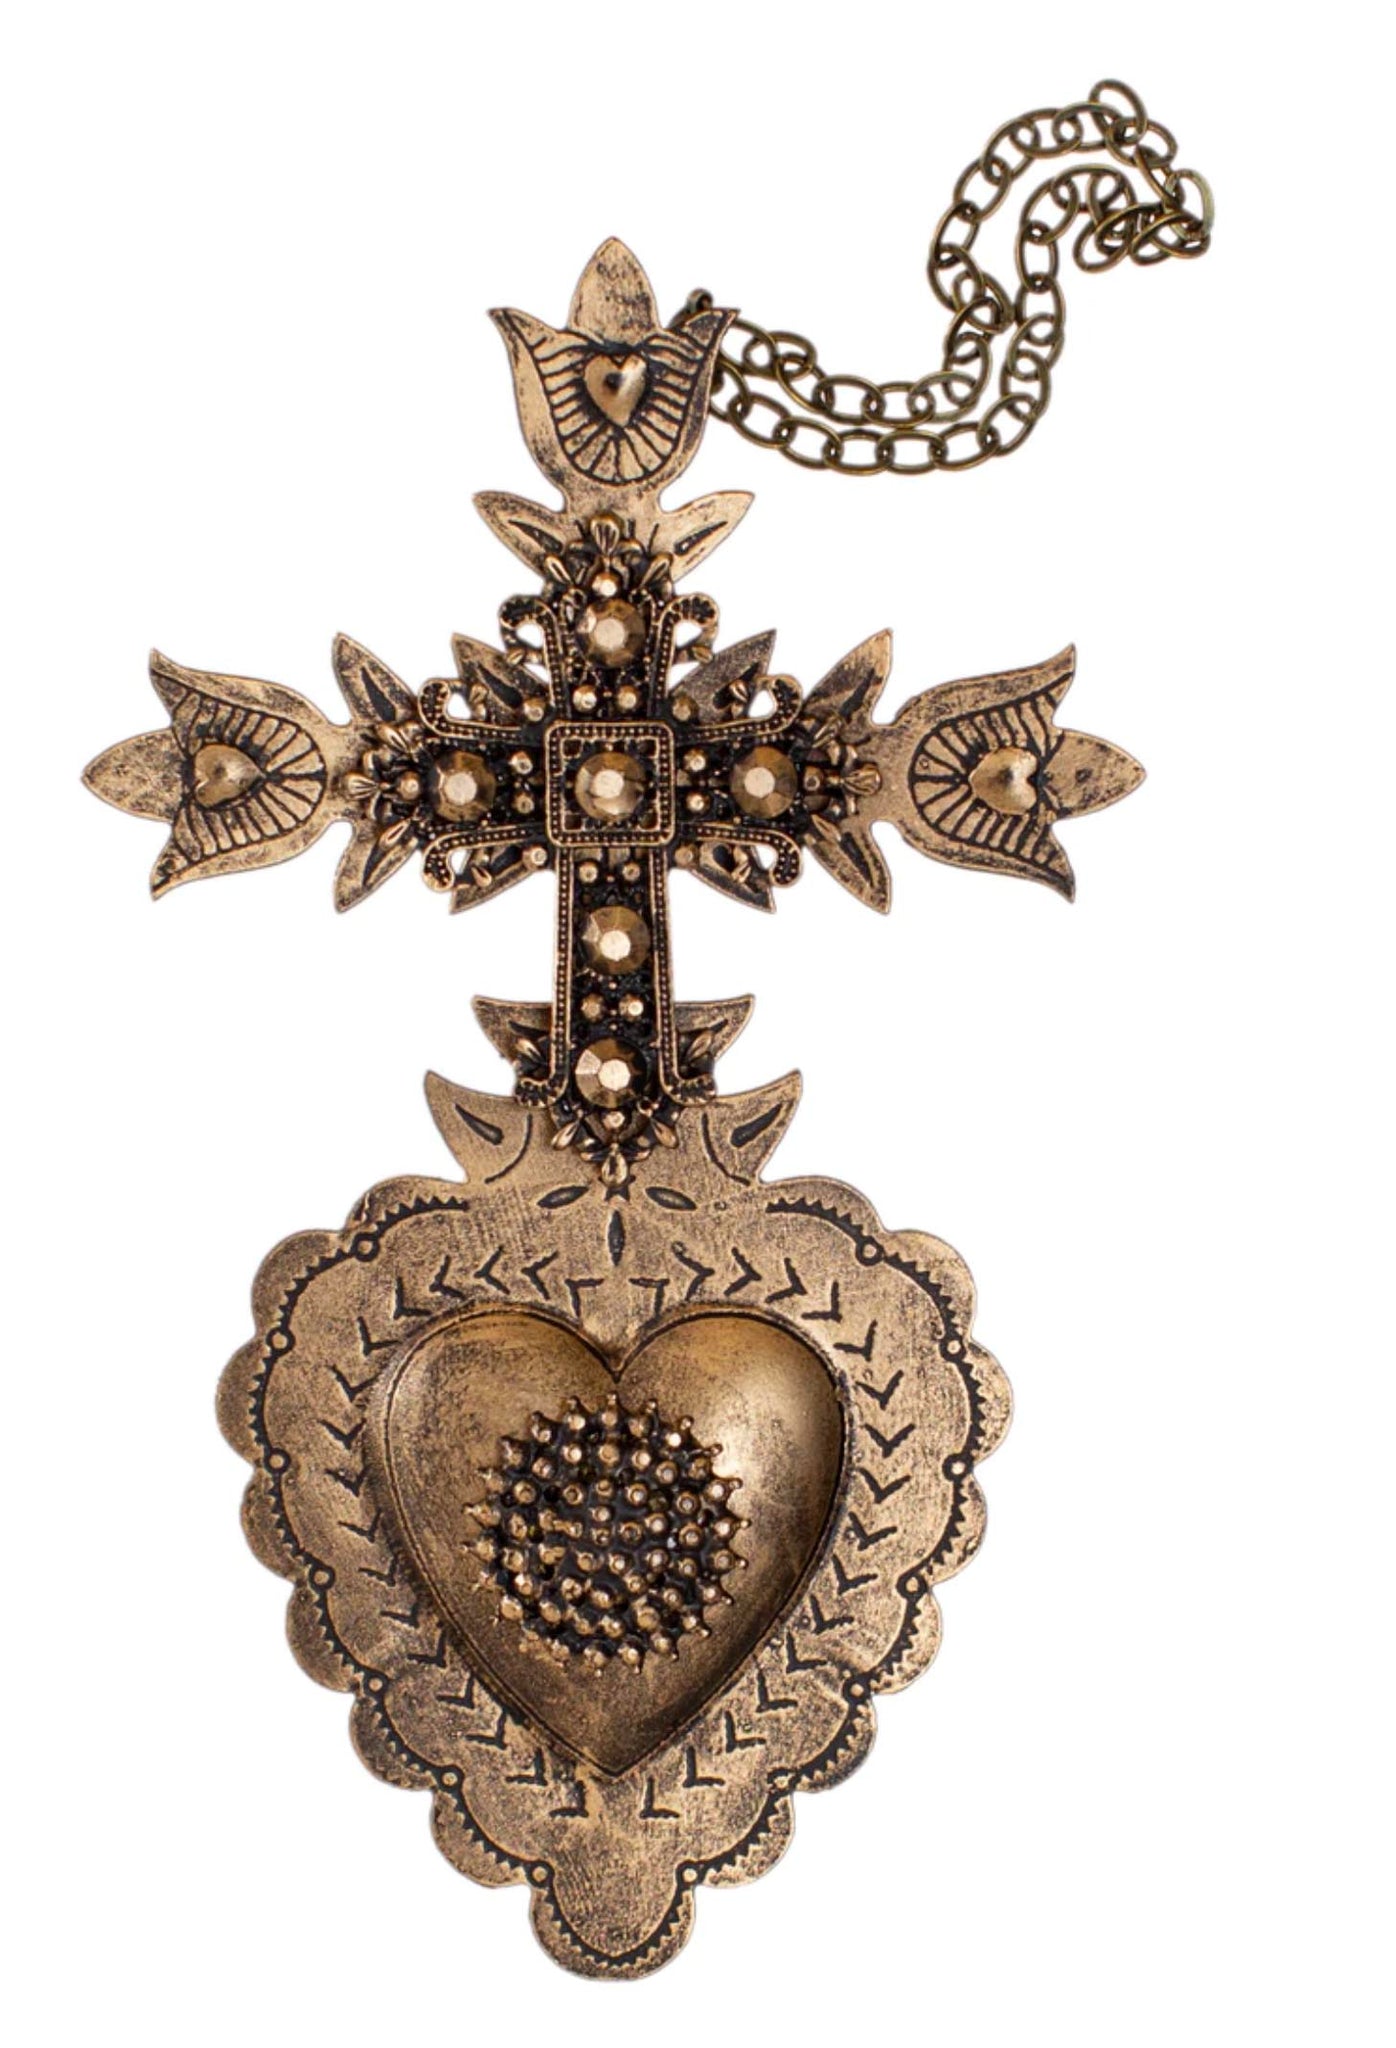 CROSS BLACK GOLD ANTIQUE THE QUEEN OF CROWNS